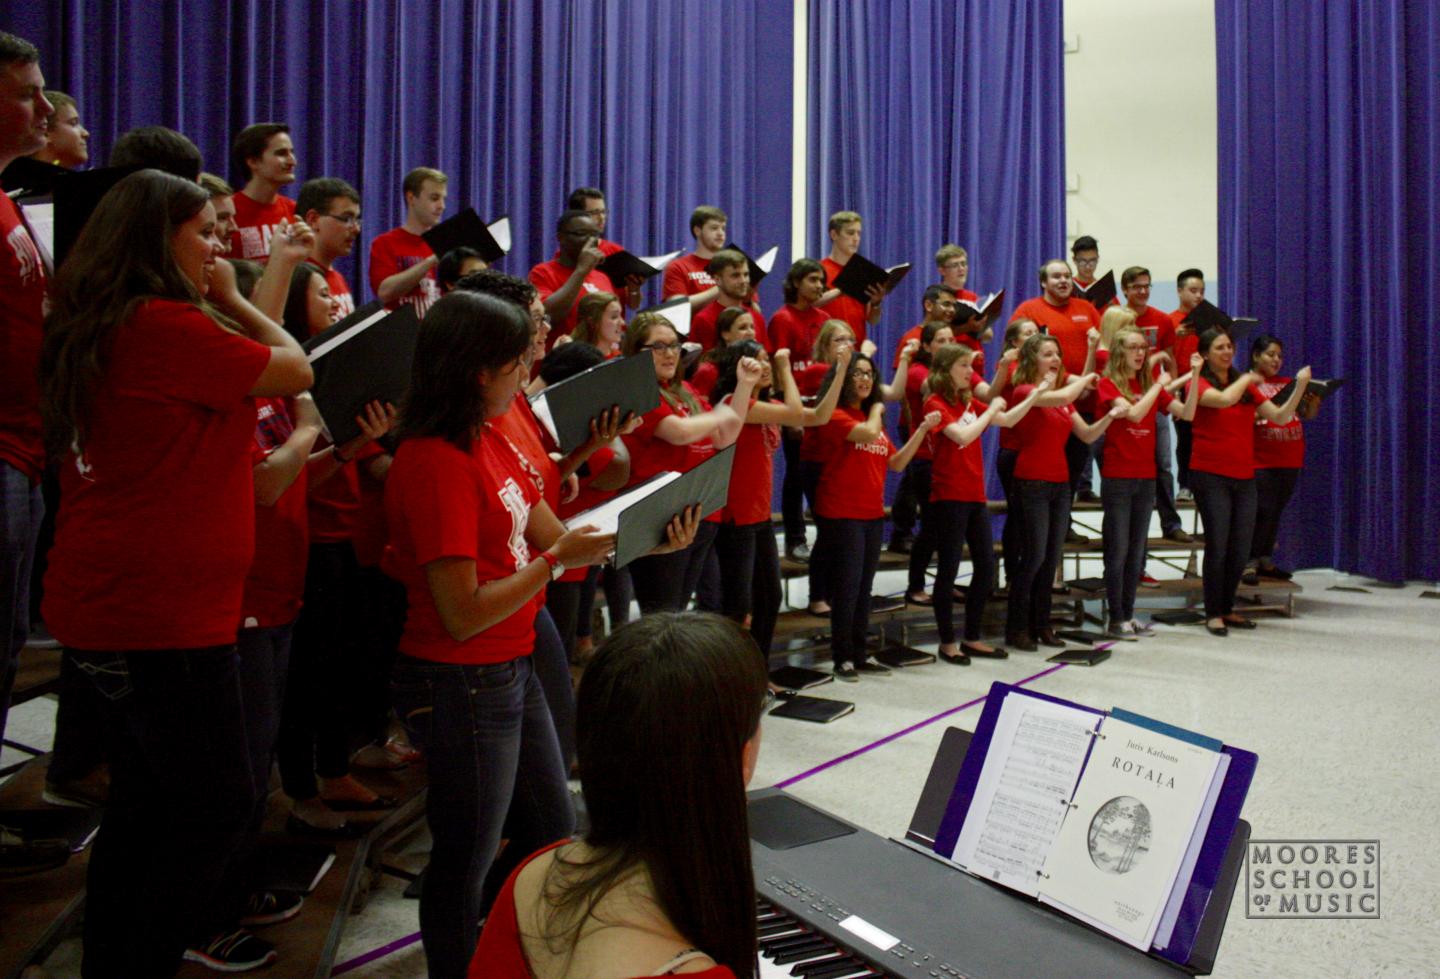 A picture of the Moores School of Music Concert Chorale in a recent performance at La Grange Elementary School